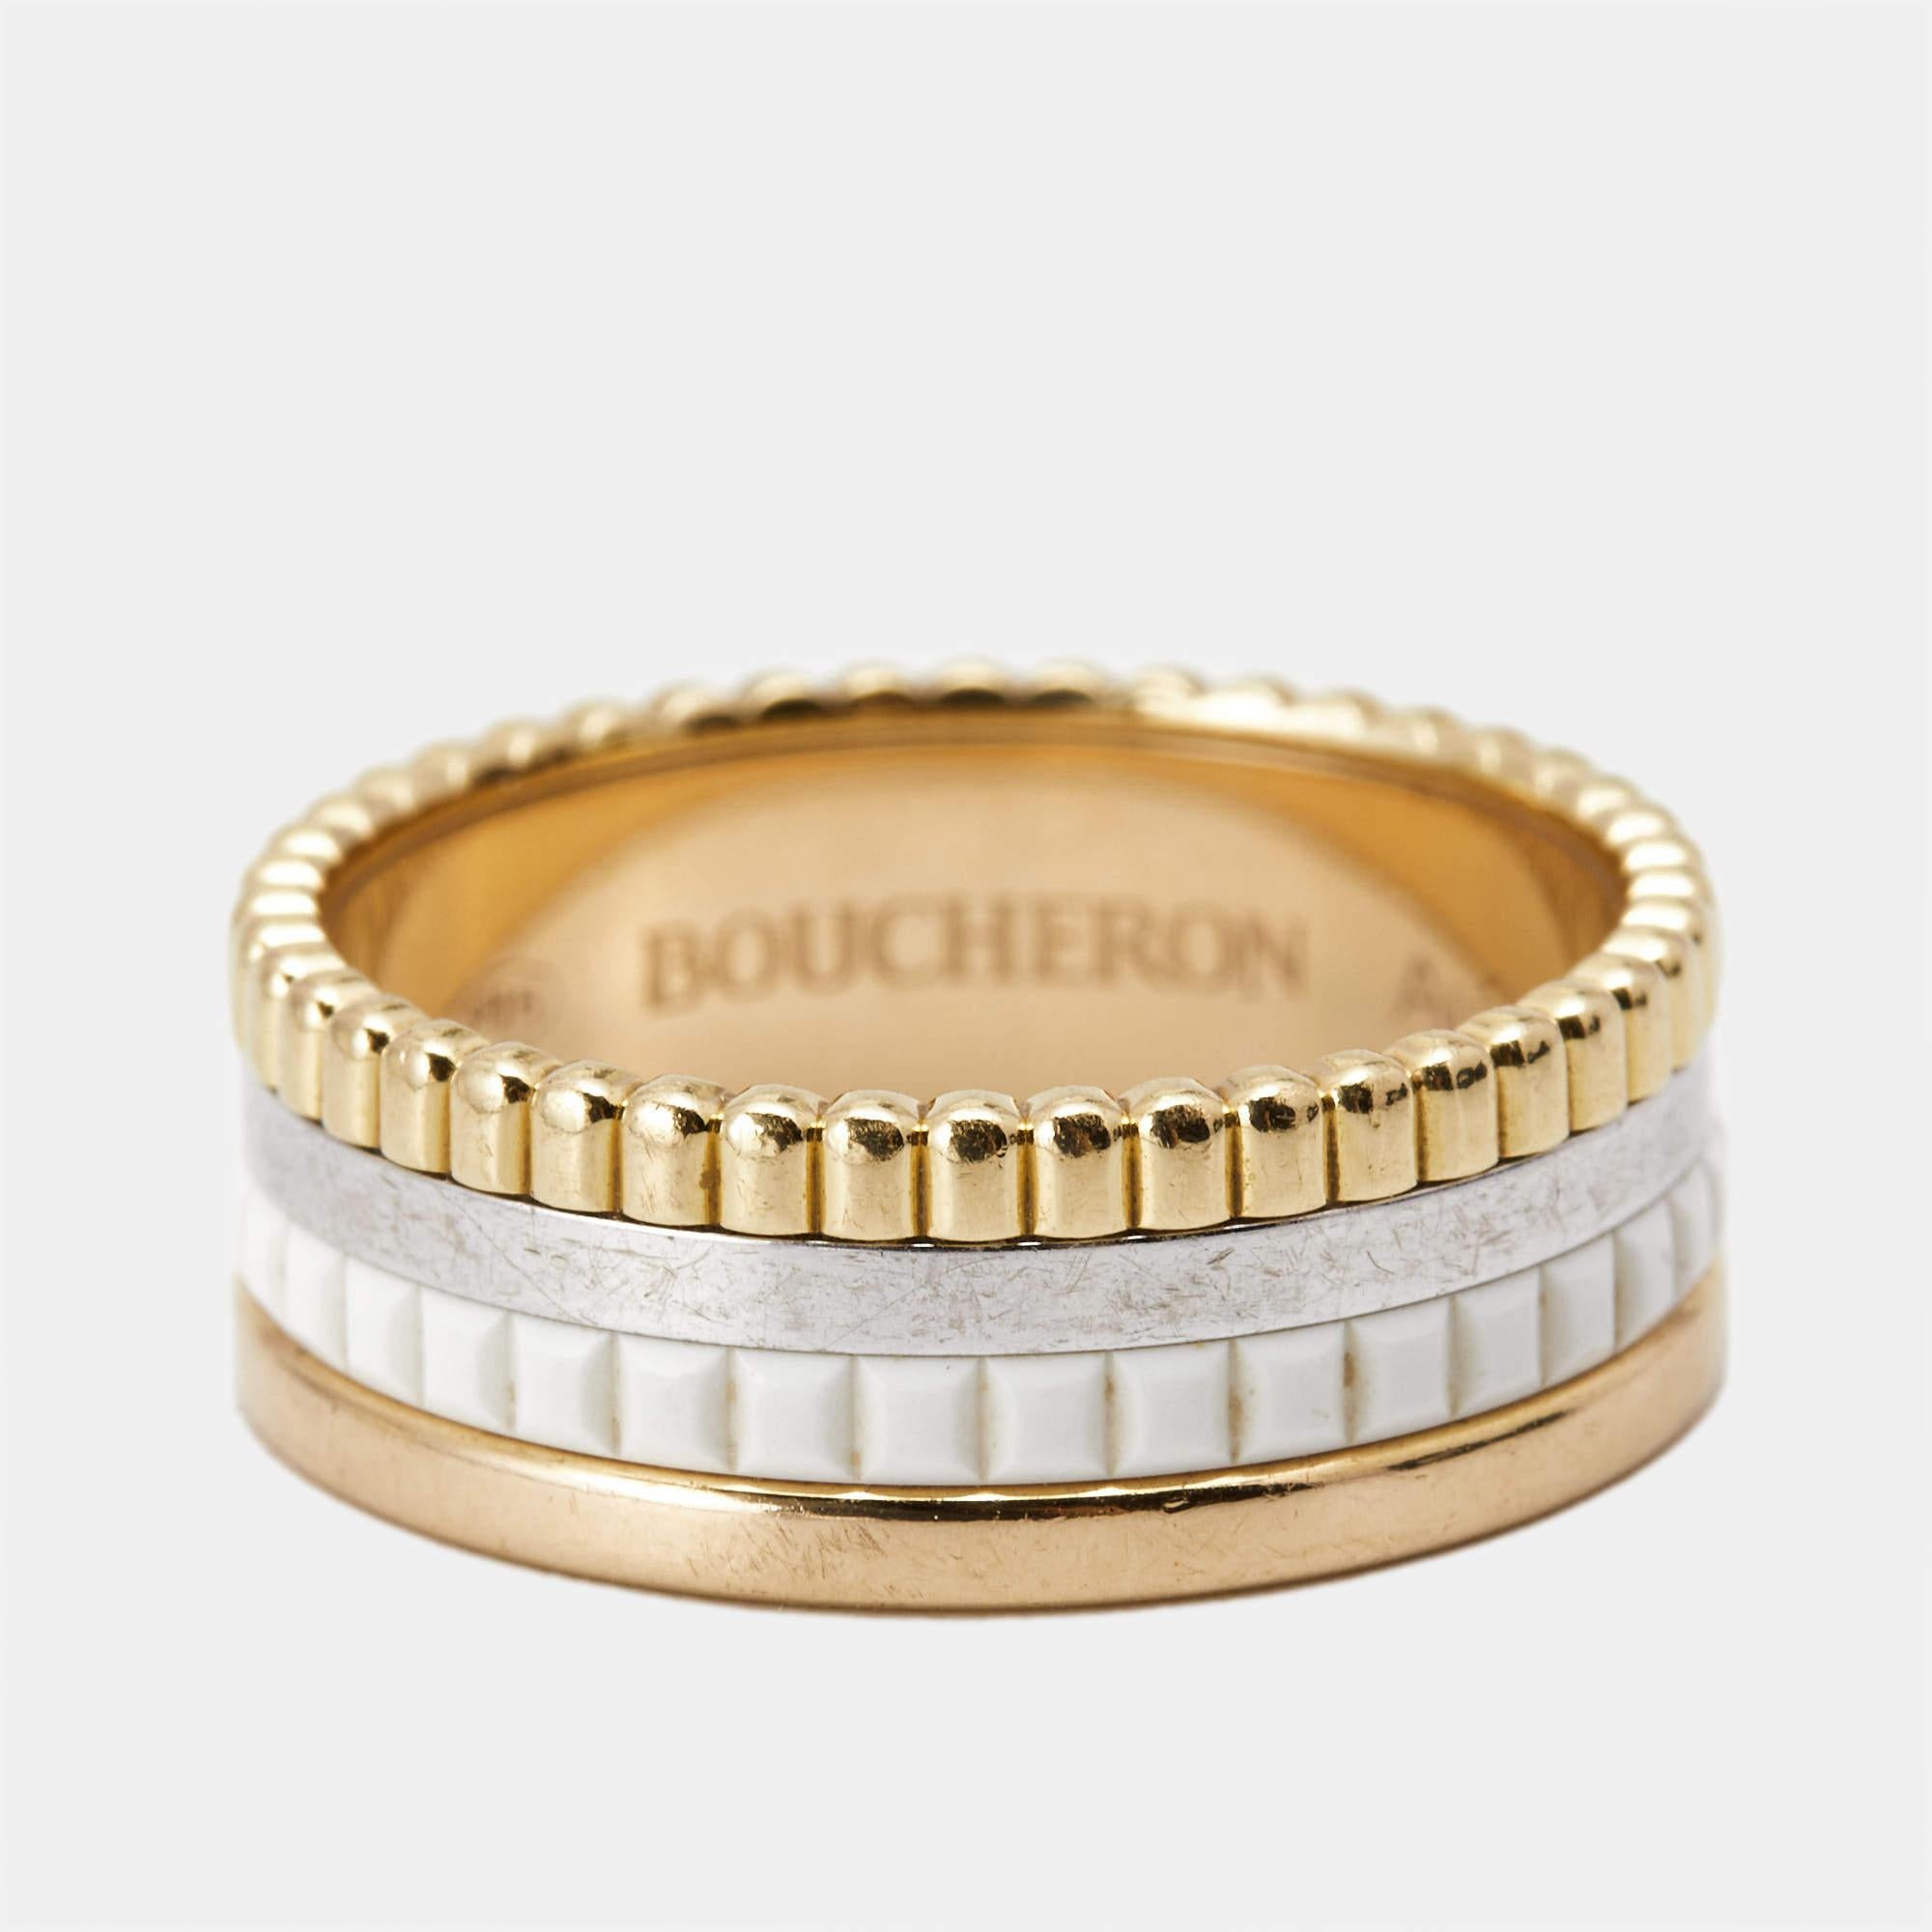 A special ring by Boucheron that promises to stand out on your hand. It is a masterfully crafted piece of jewelry that embodies timeless luxury and sophisticated elegance.

